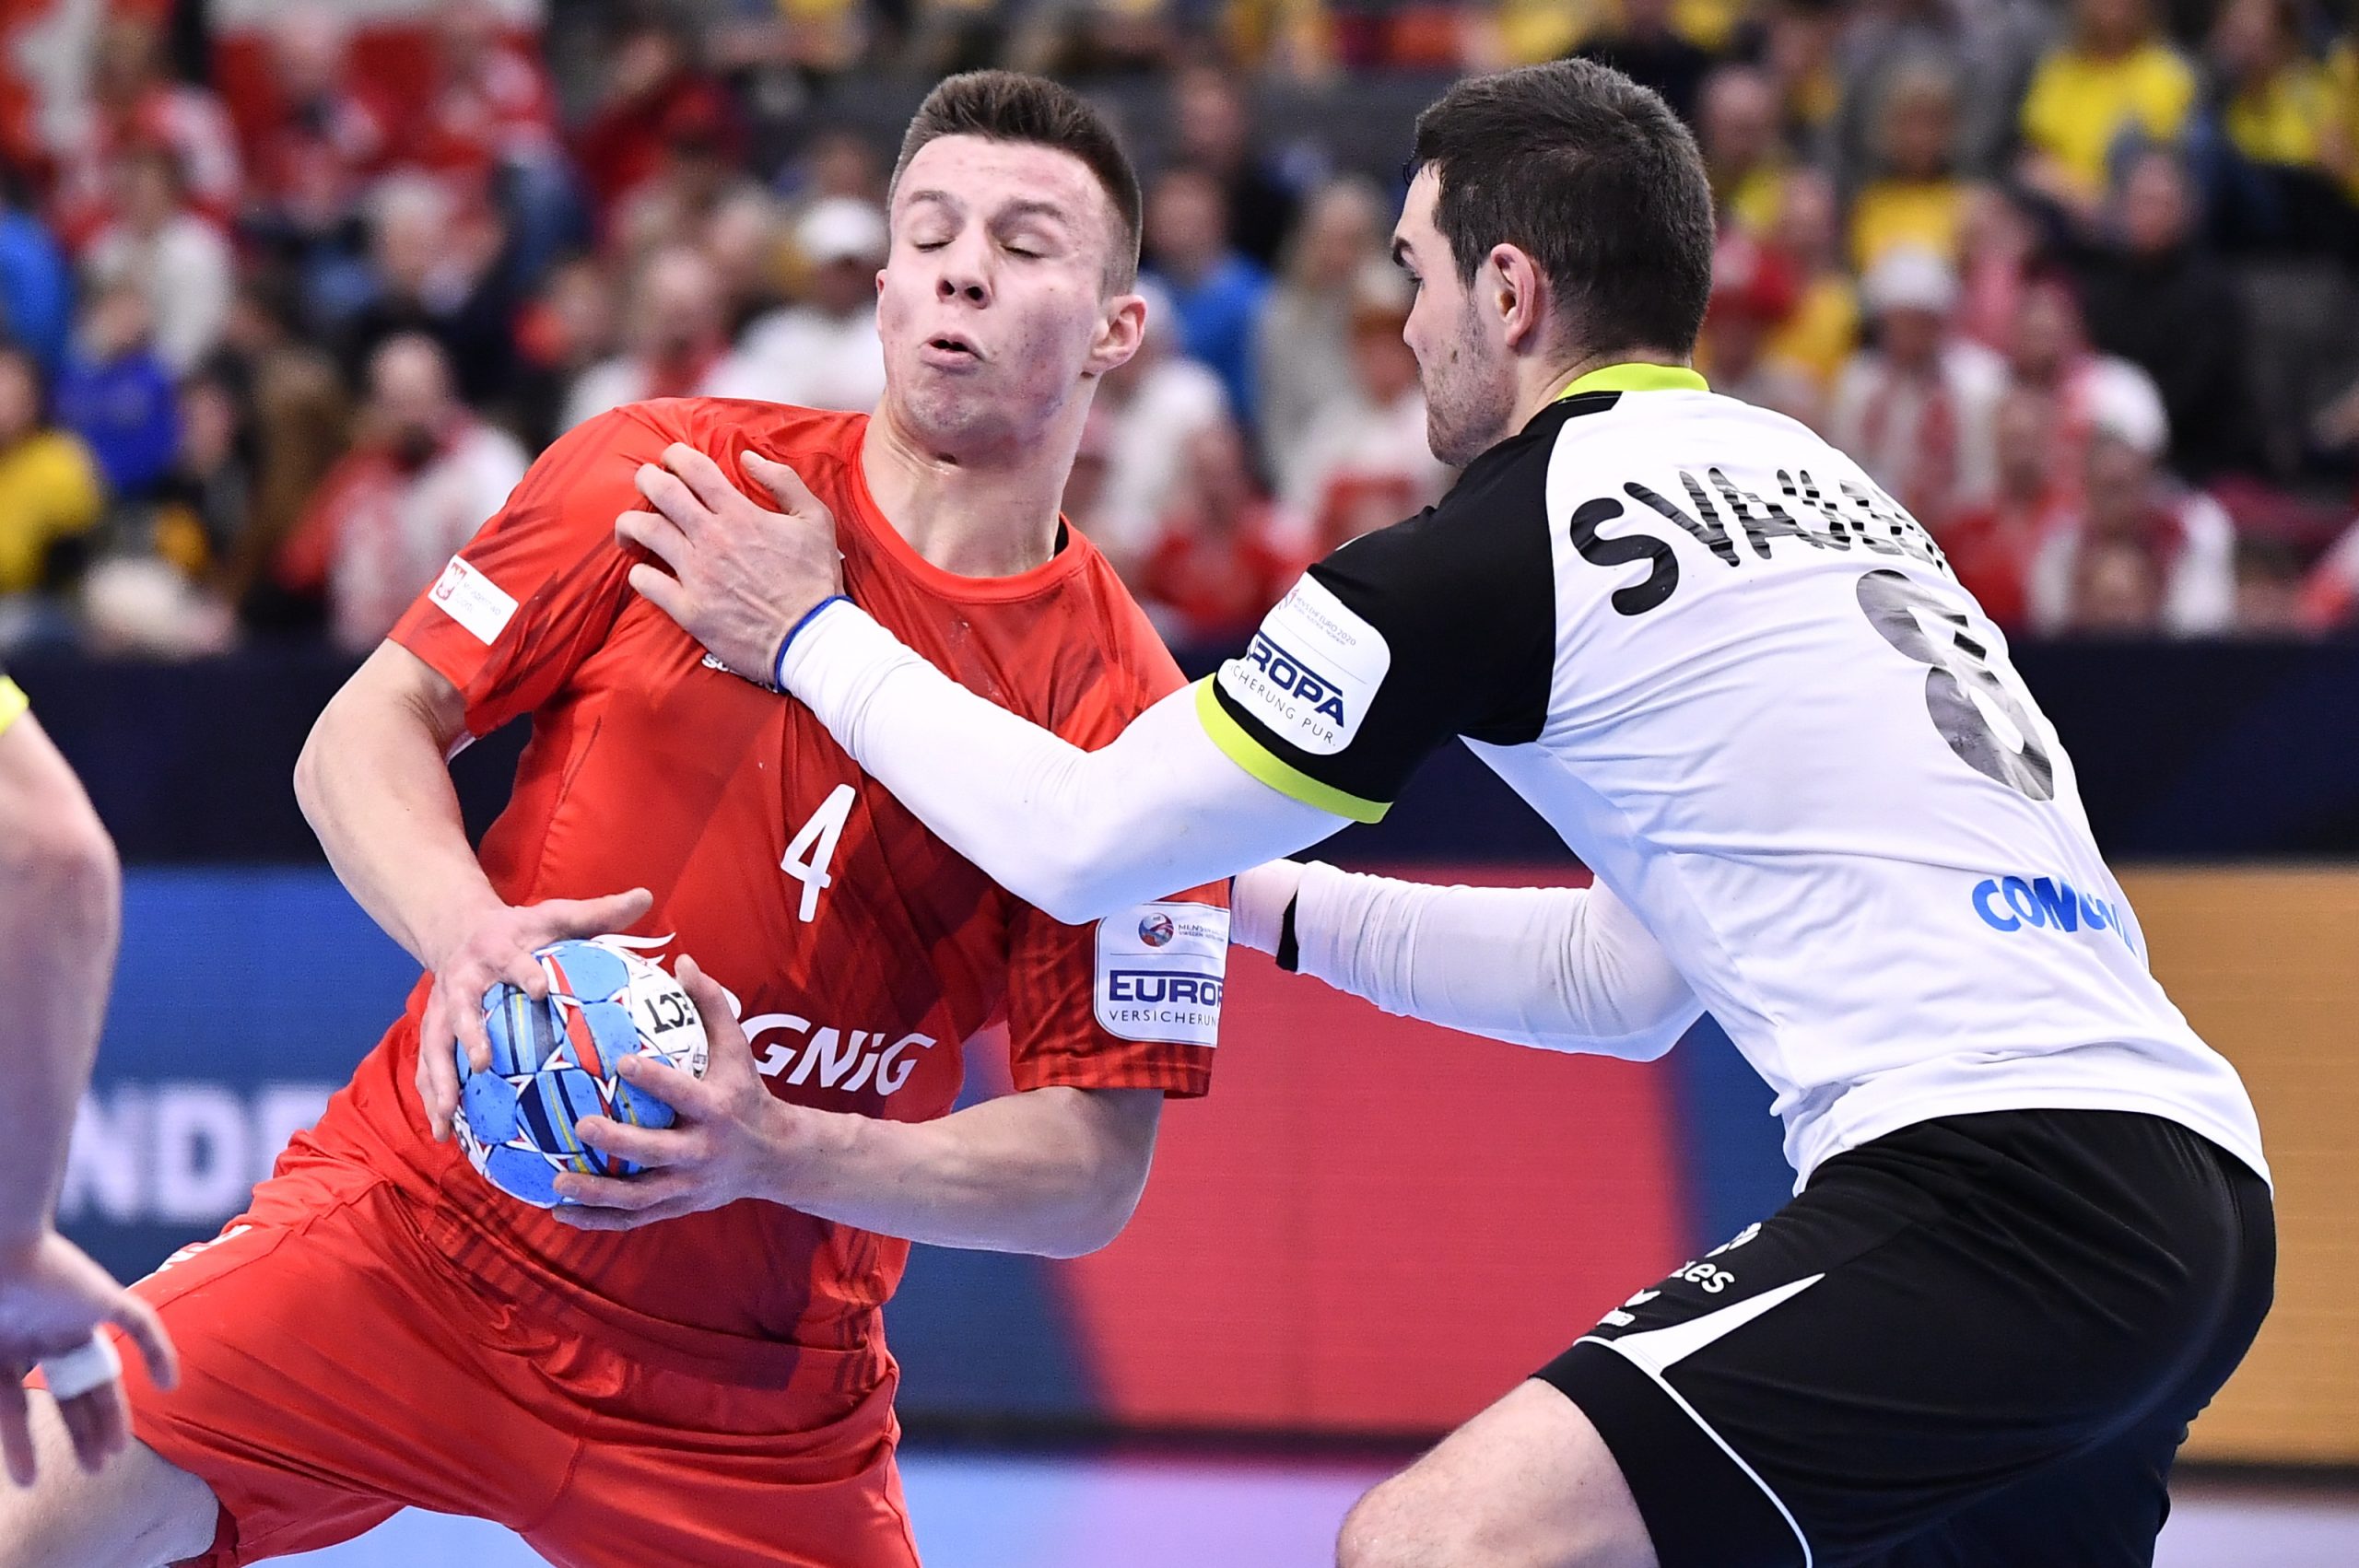 epa08122845 Poland's Michal Olejiczak (L) in action against Michal Svaljen of Switzerland during the Men's EHF EURO 2020 Handball preliminary round match between Switzerland and Poland in Gothenburg, Sweden, 12 January 2020.  EPA/BJORN LARSSON ROSVALL  SWEDEN OUT